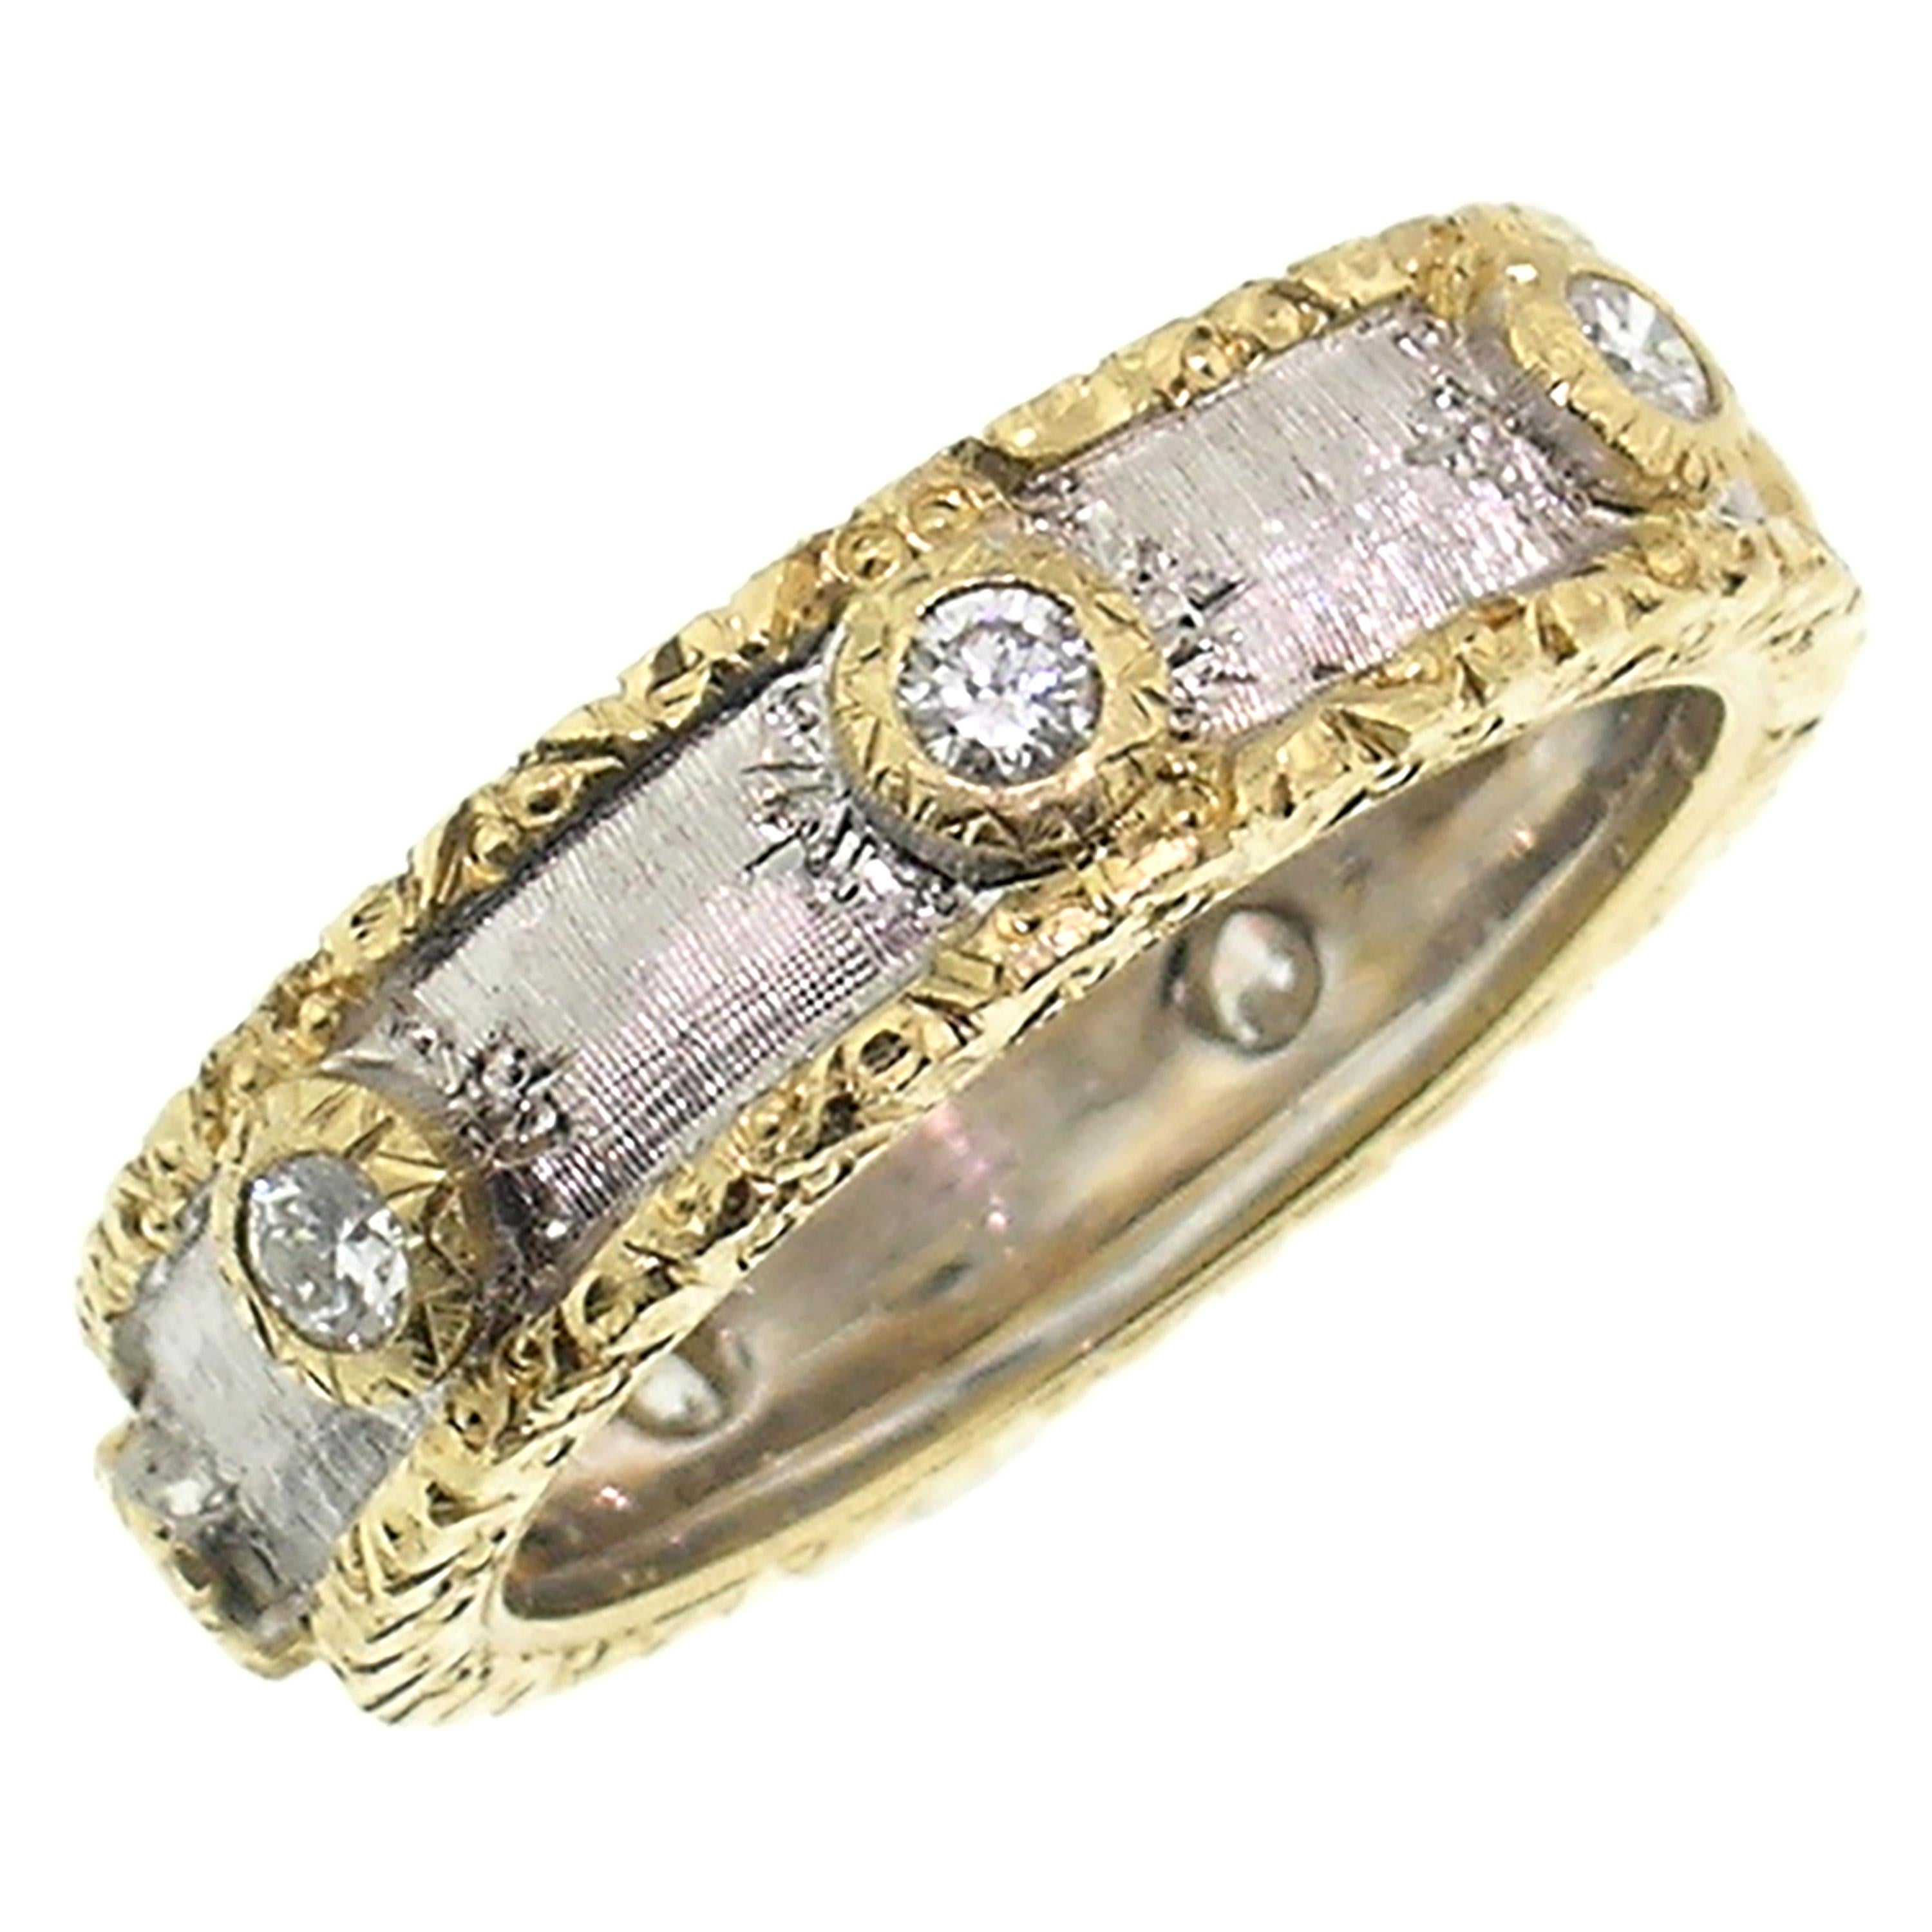 18 Karat Gold and Diamond Eternity Band, Handmade and Hand-Engraved in Italy